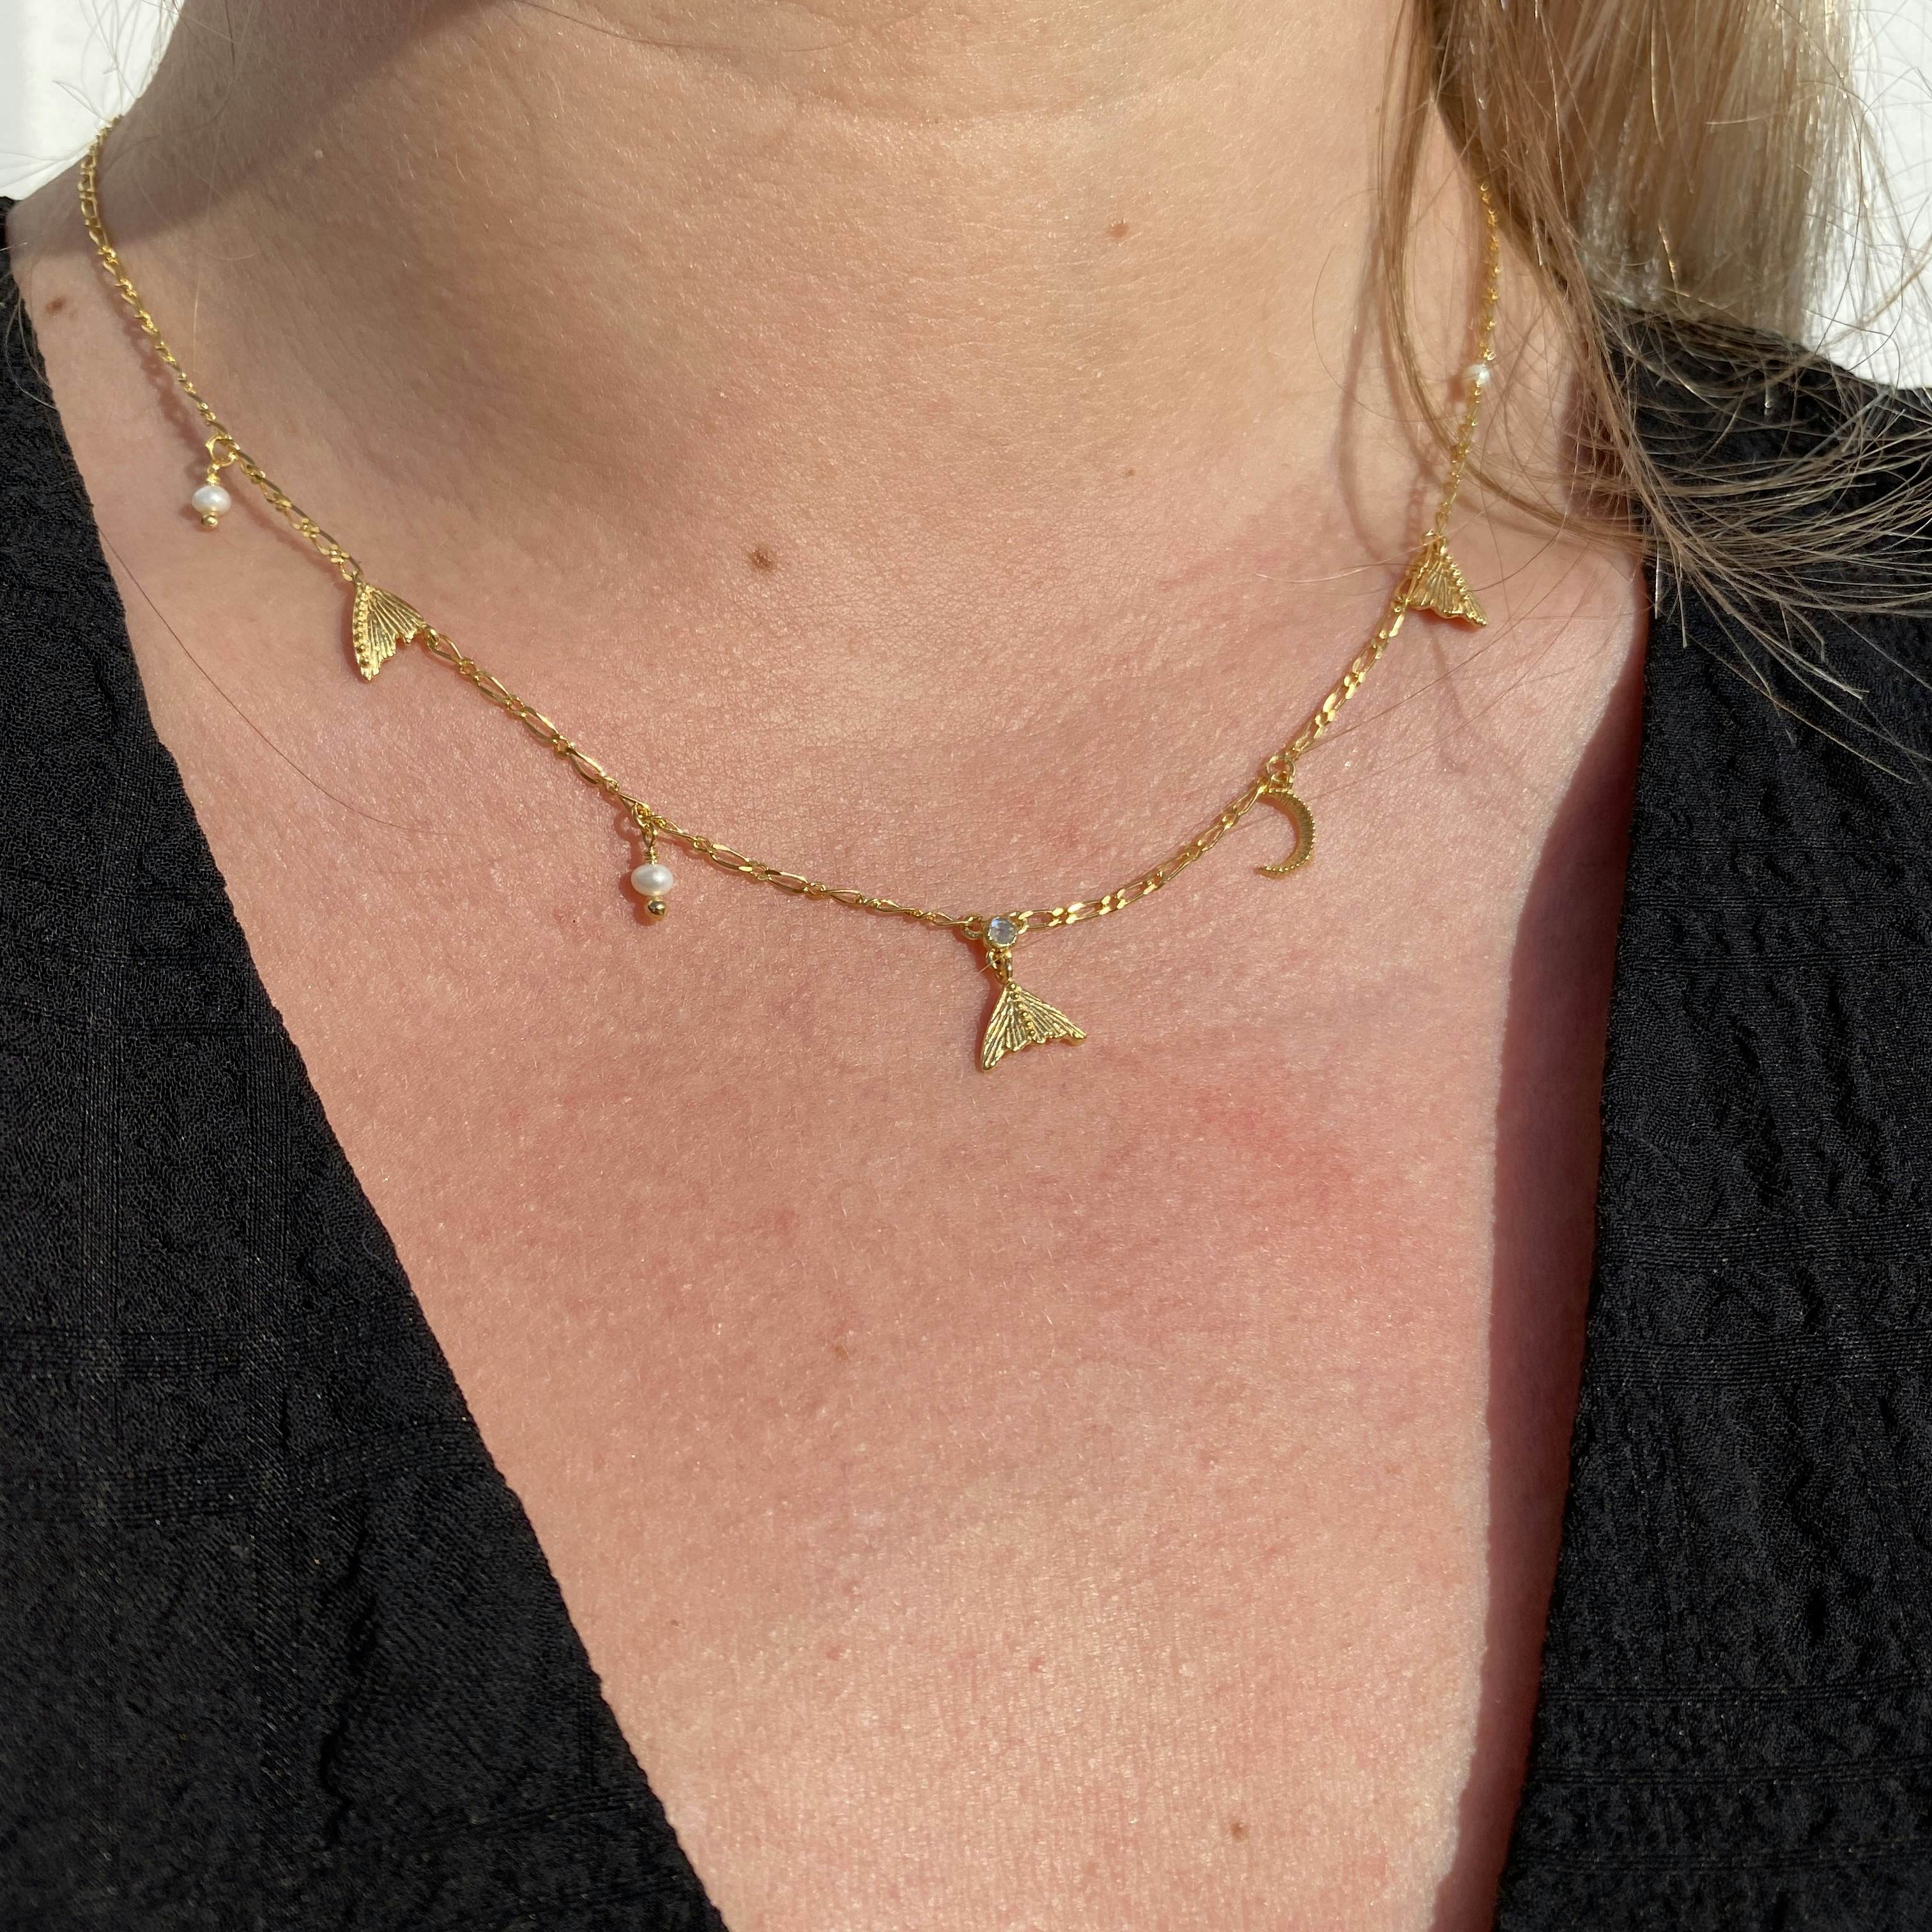 Nocha Necklace from Maanesten in Goldplated-Silver Sterling 925